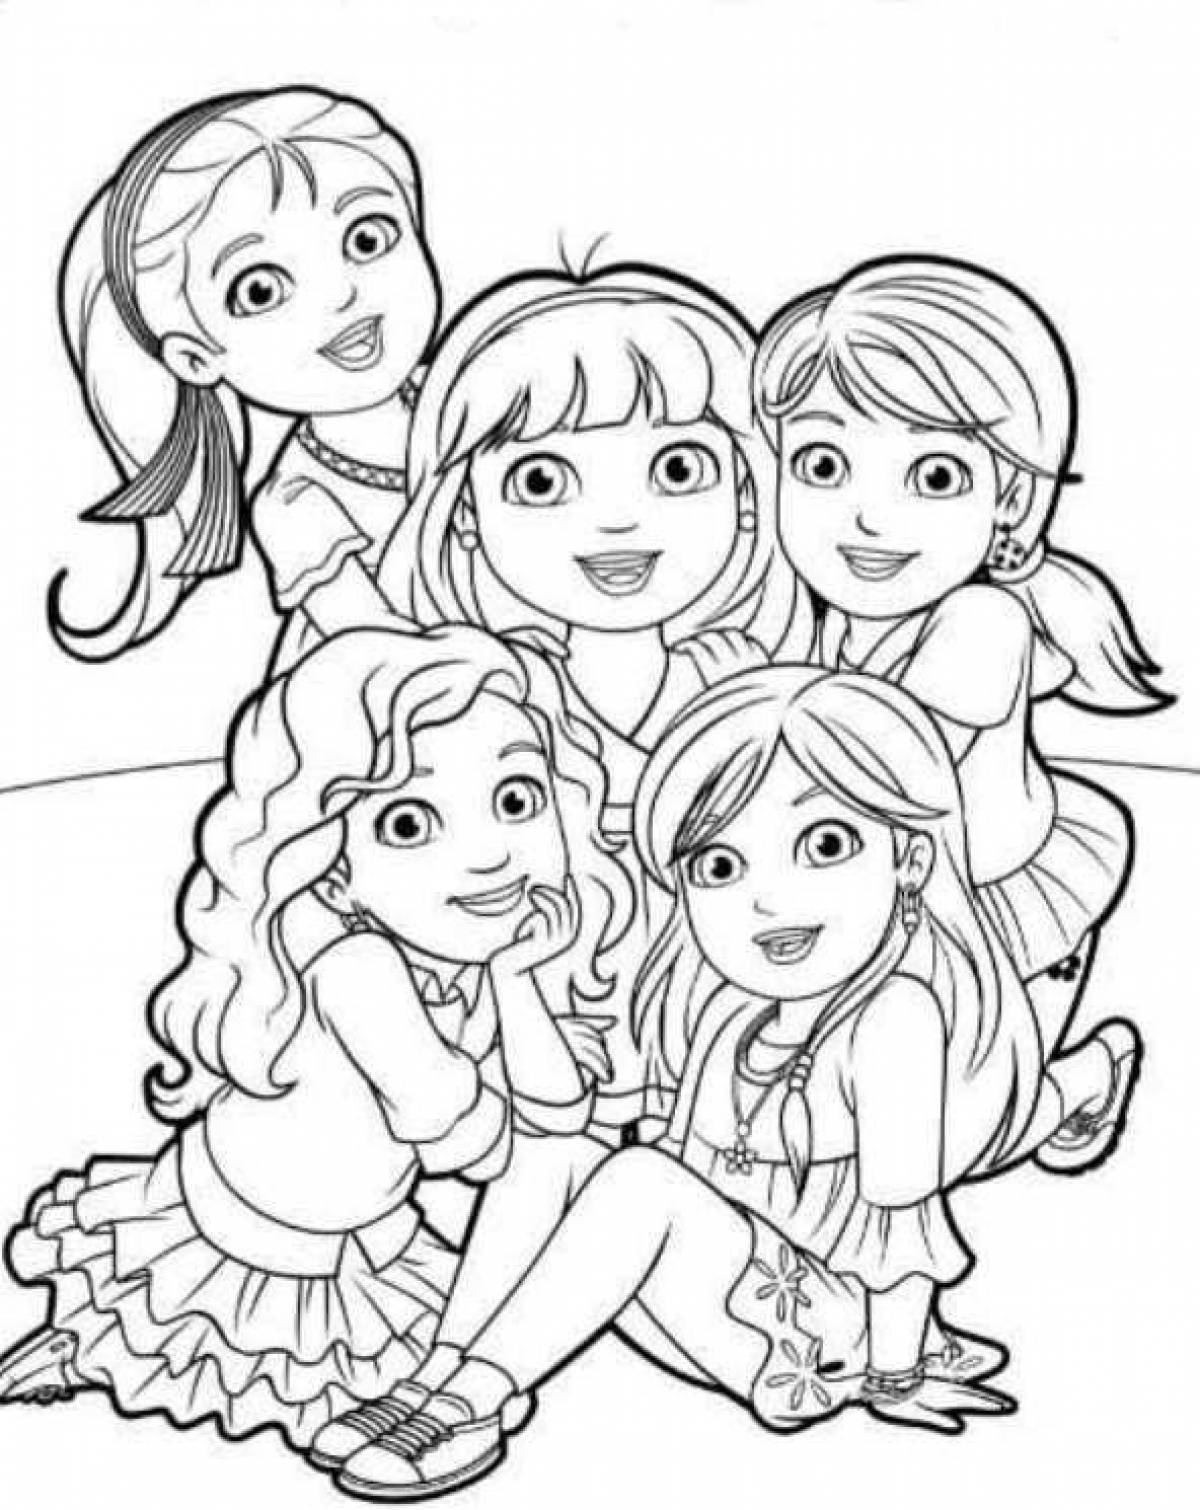 Dasha and friends drawing